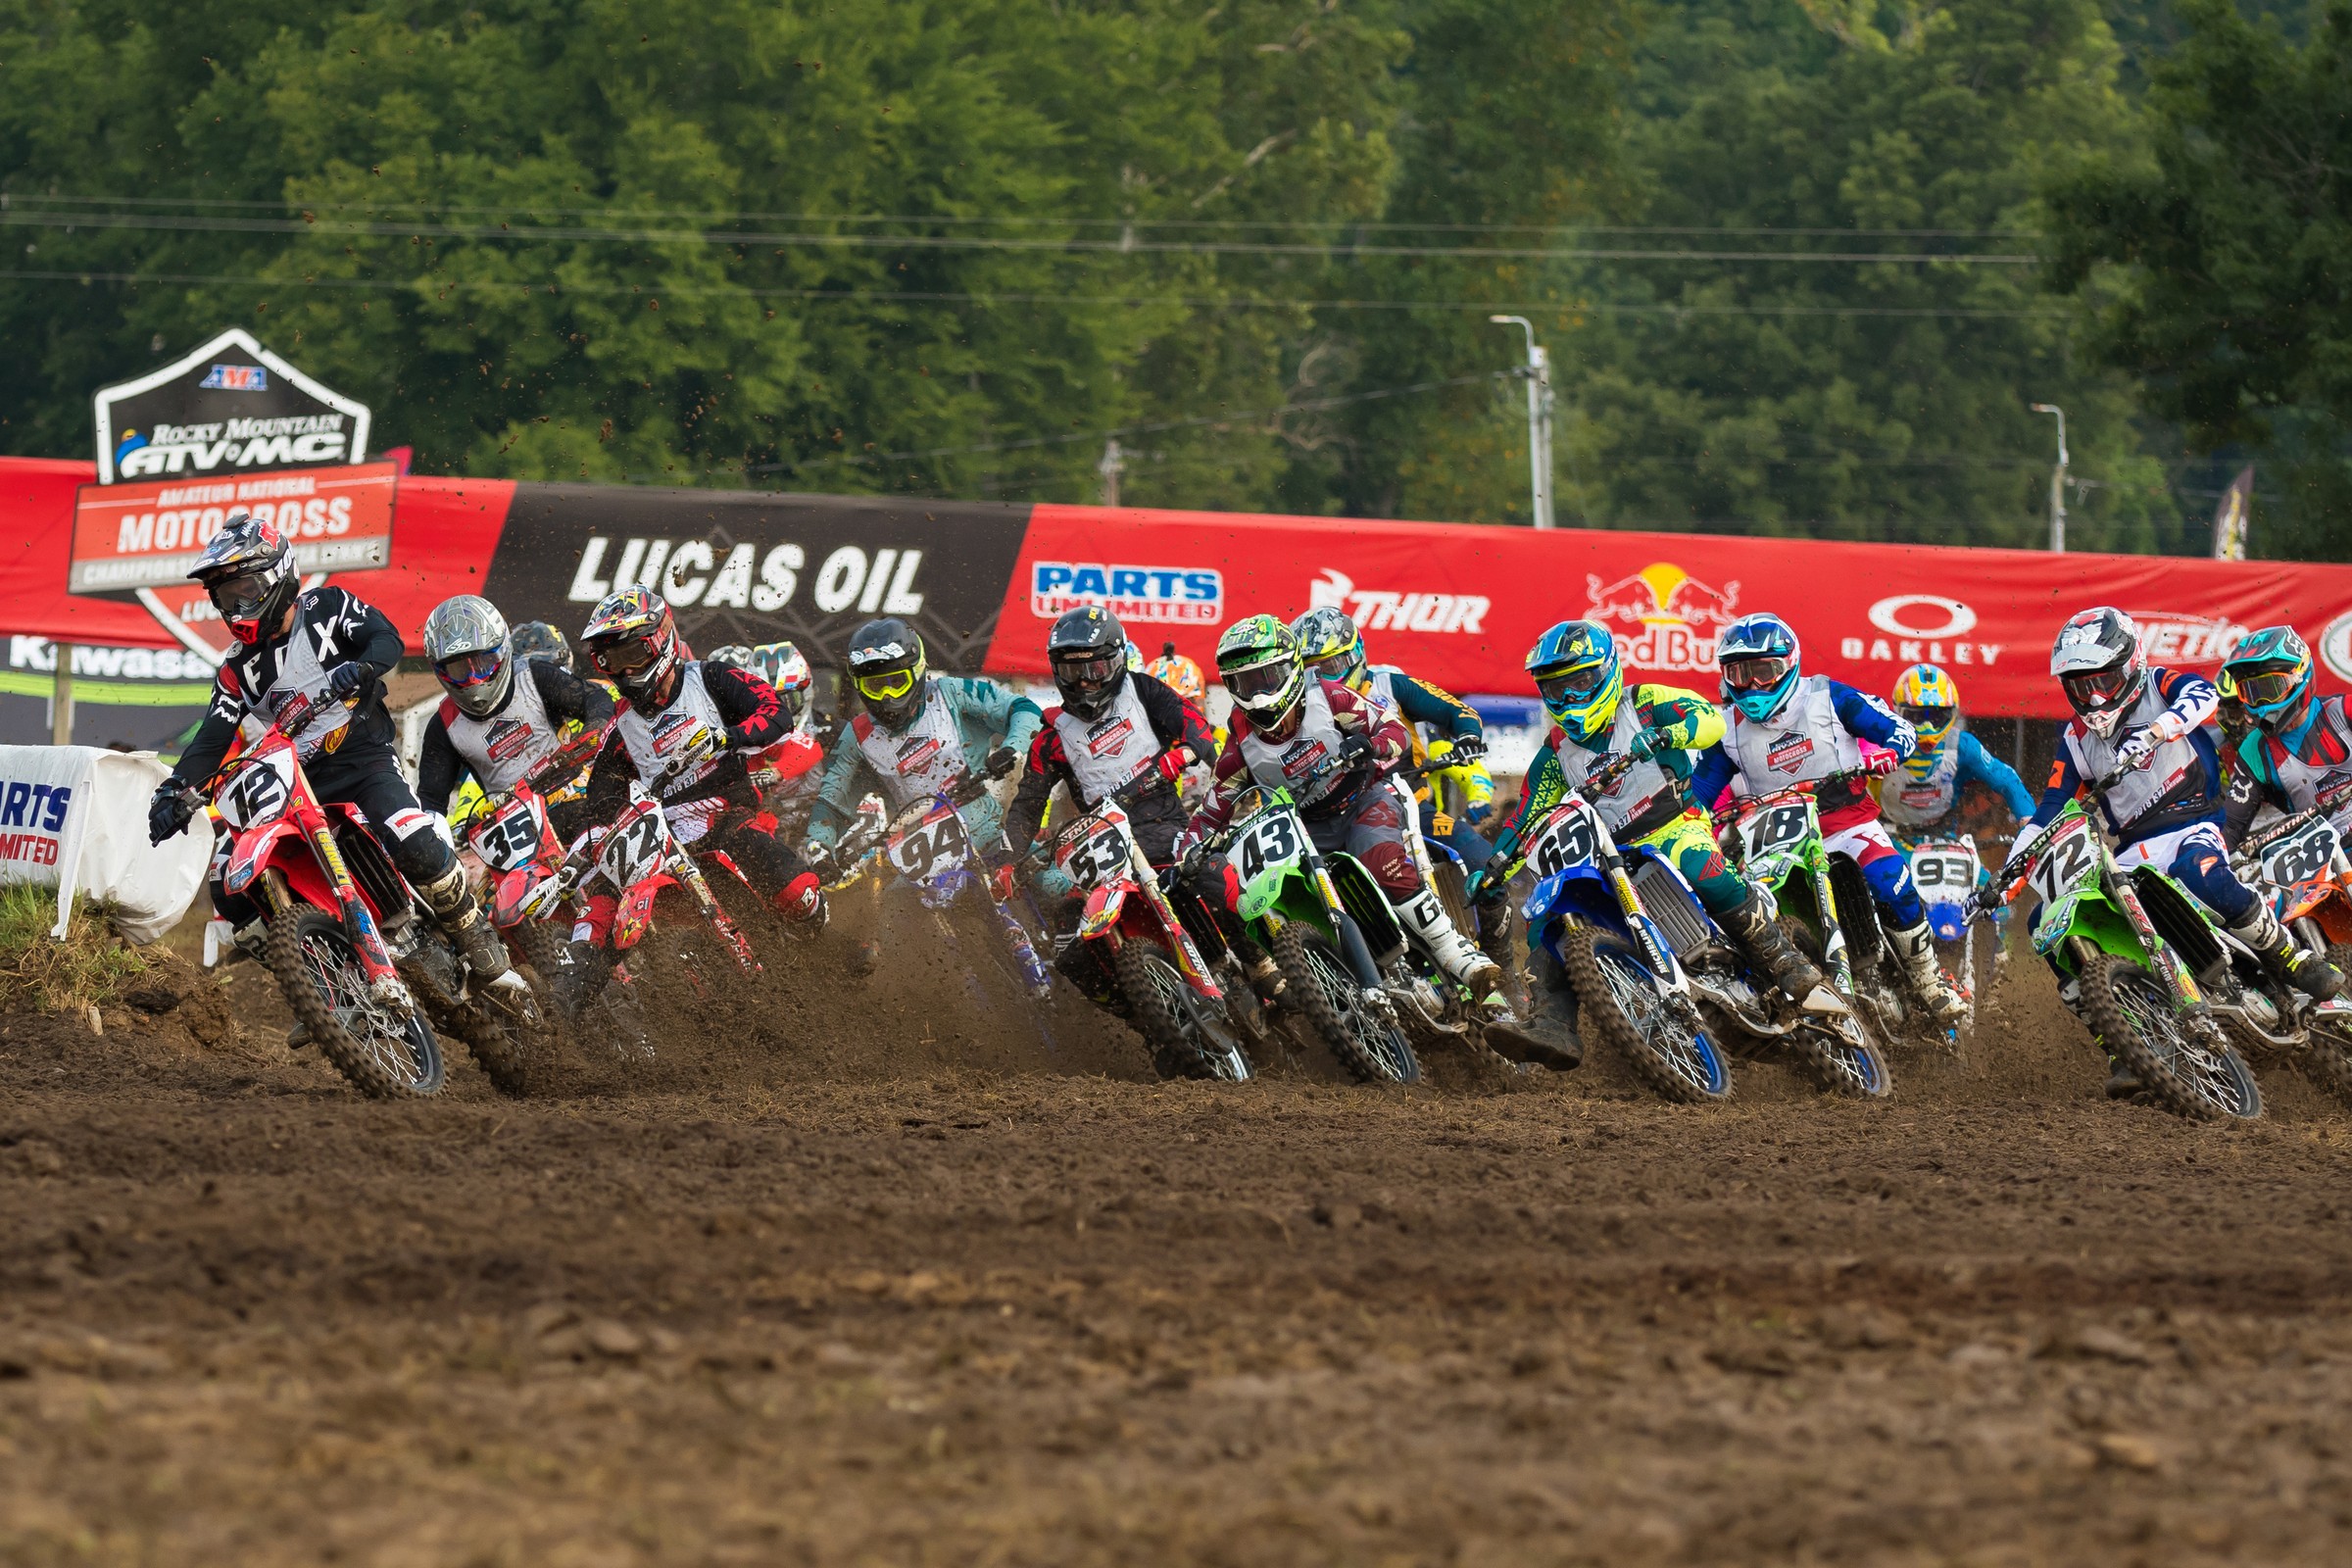 Live Timing and Results From The 2019 Rocky Mountain ATV/MC AMA Amateur National Motocross Championship - Loretta Lynns